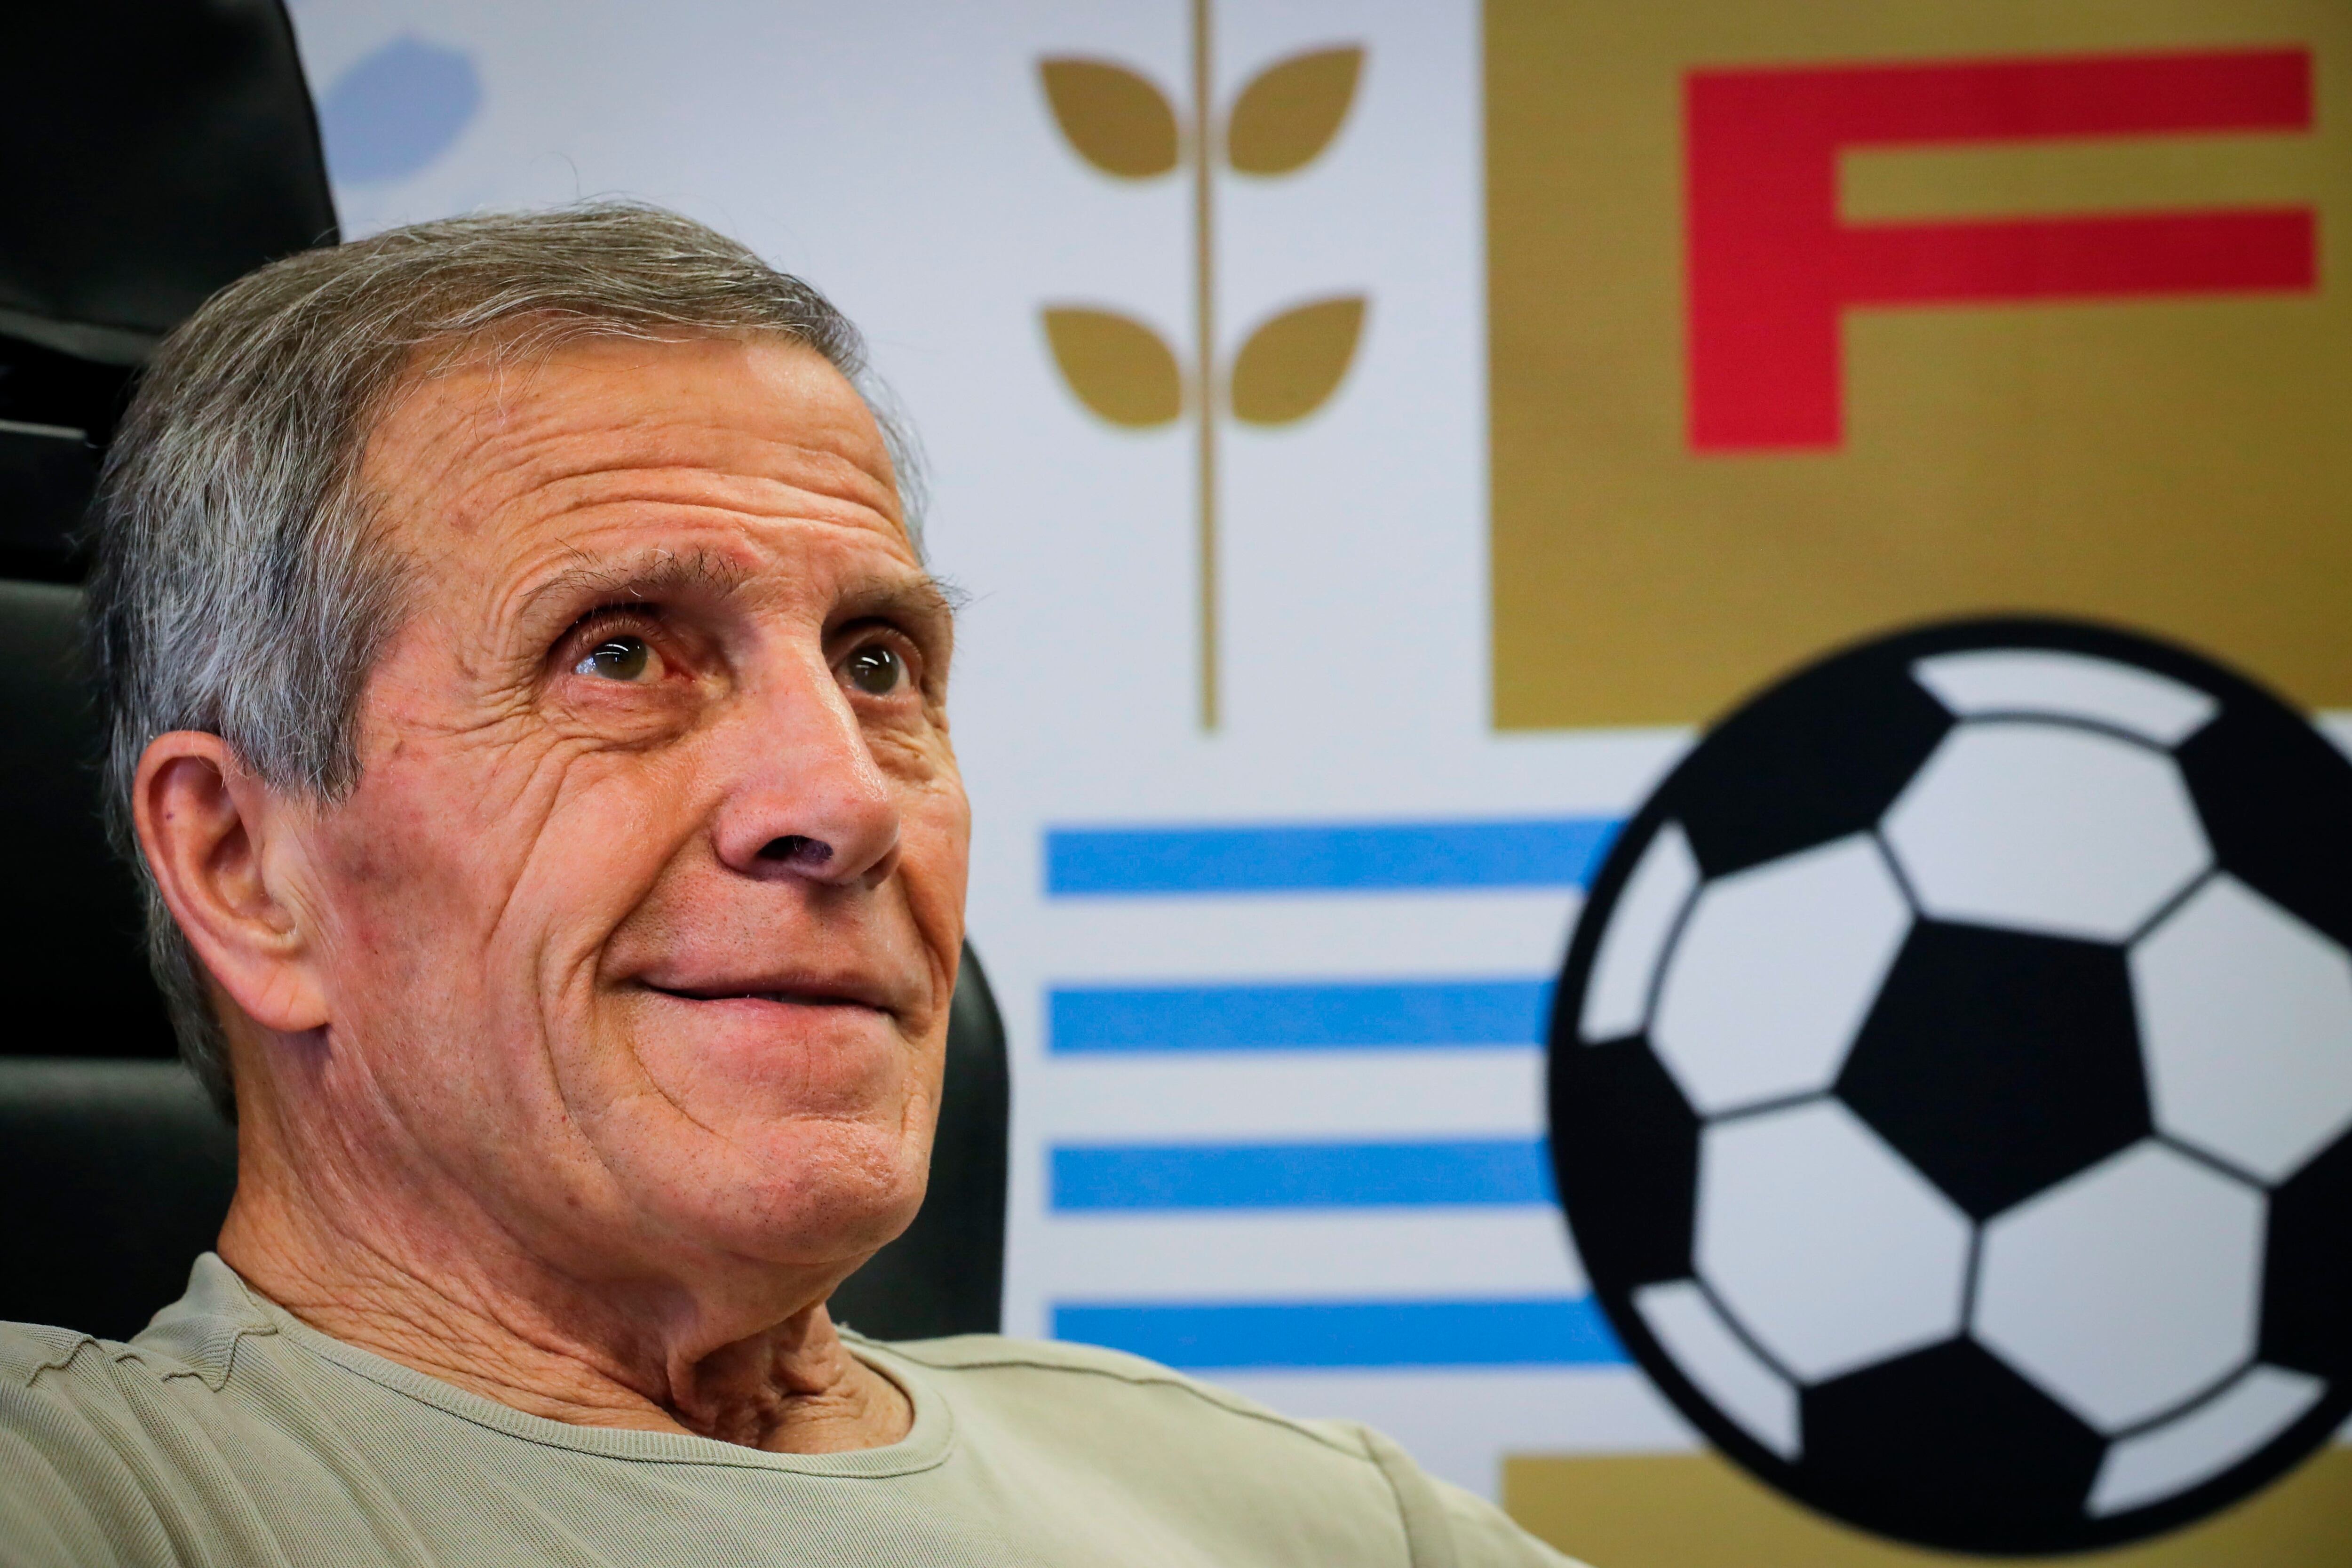 Tabárez had been in charge of the Uruguayan team for more than 15 years (EFE)